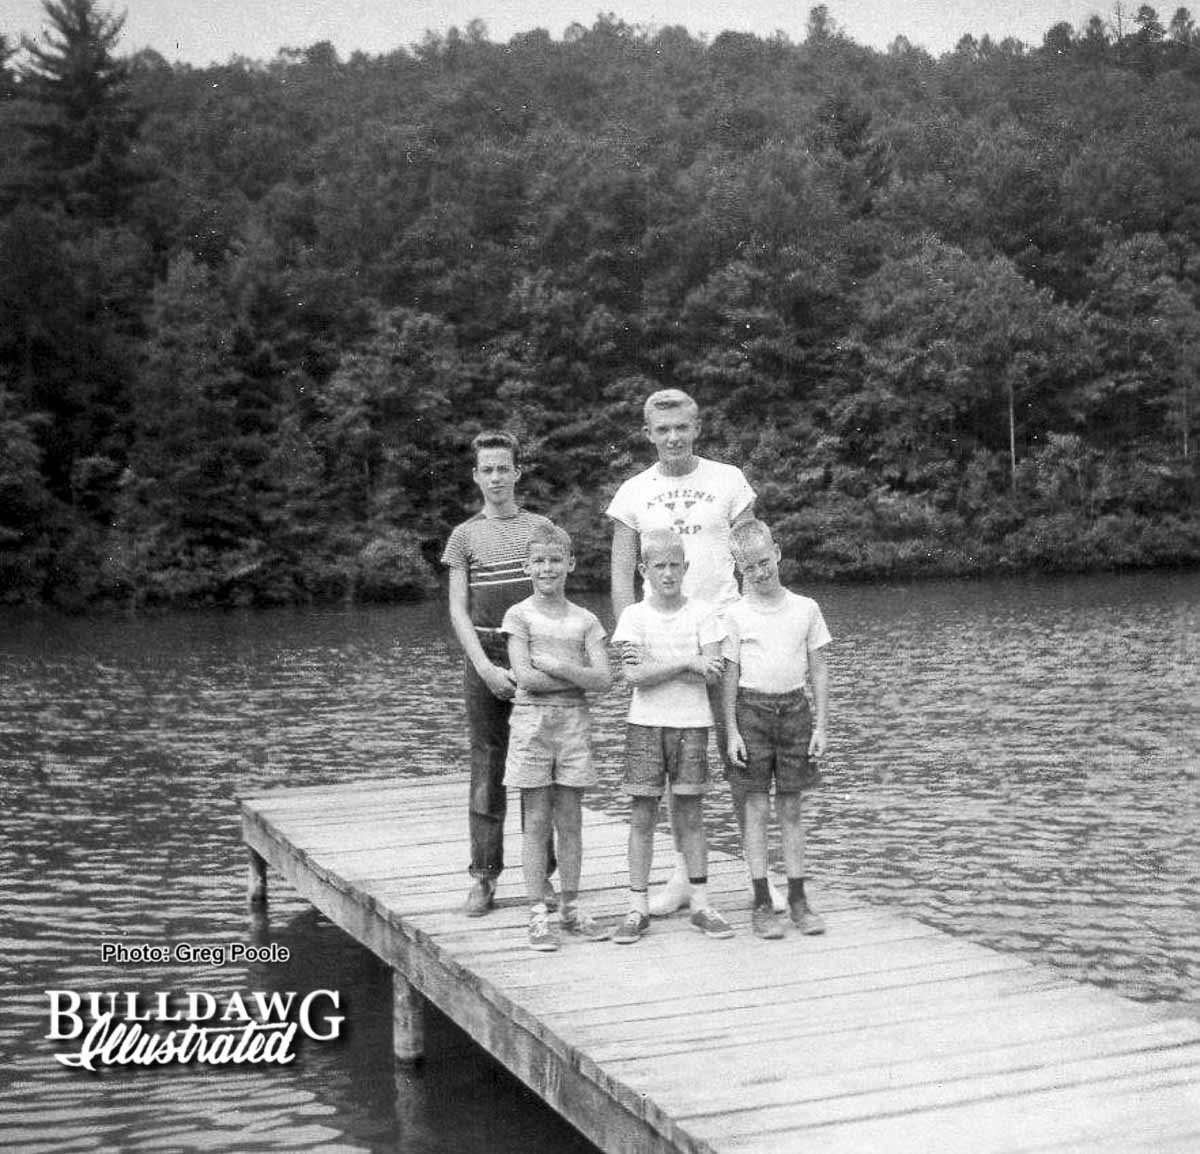 Athens Y Camp 1957 Back: Schley Ricketson, (L) Unknown Counselor Front: Greg Poole (L), Billy Wilhoit and Joe Ricketson